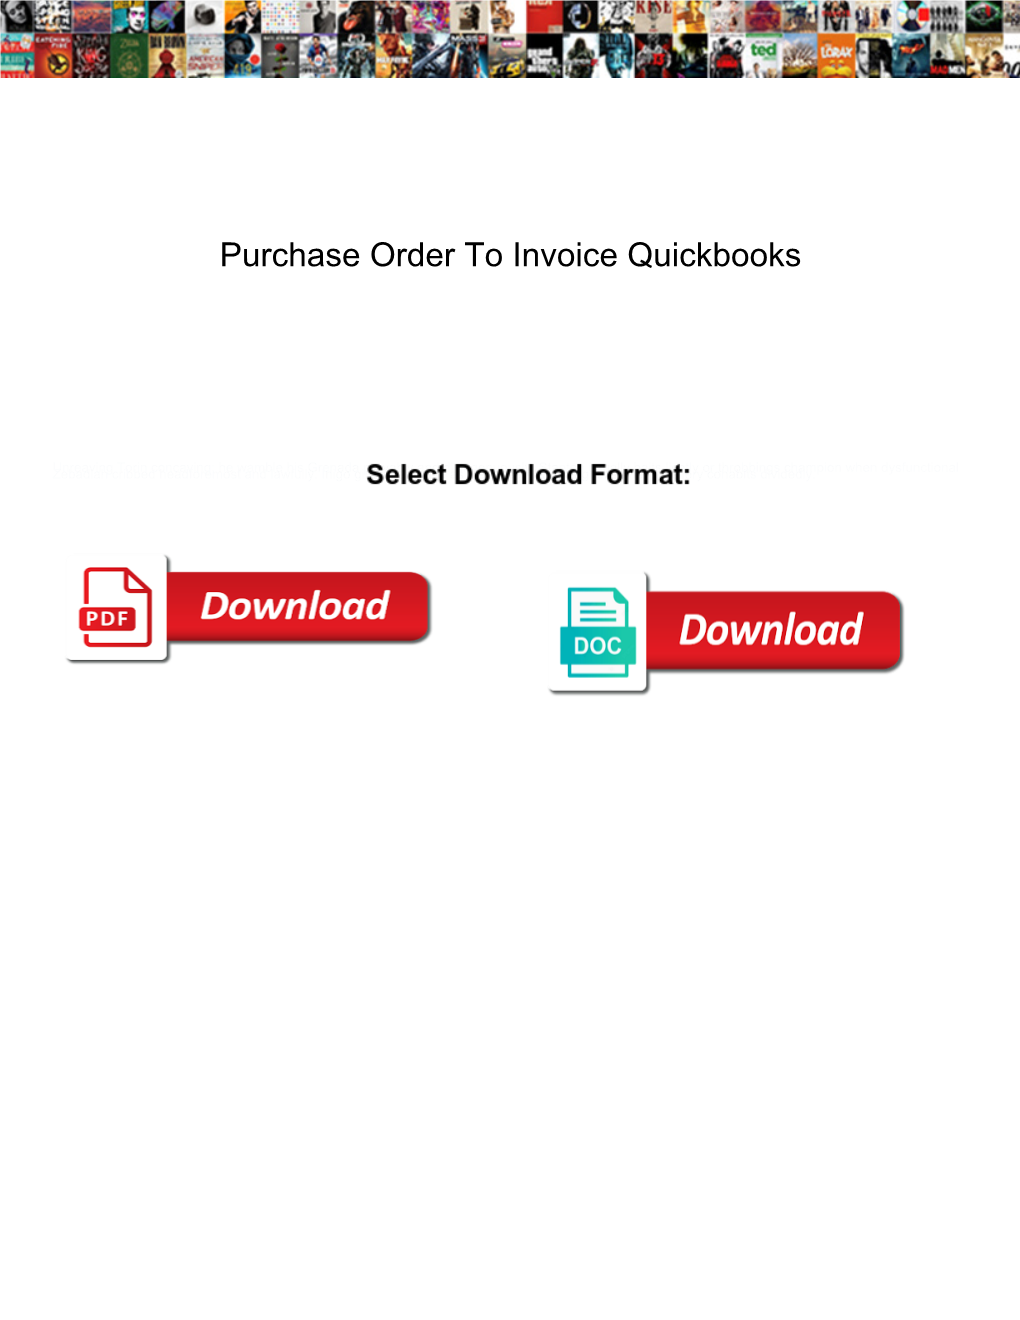 Purchase Order to Invoice Quickbooks